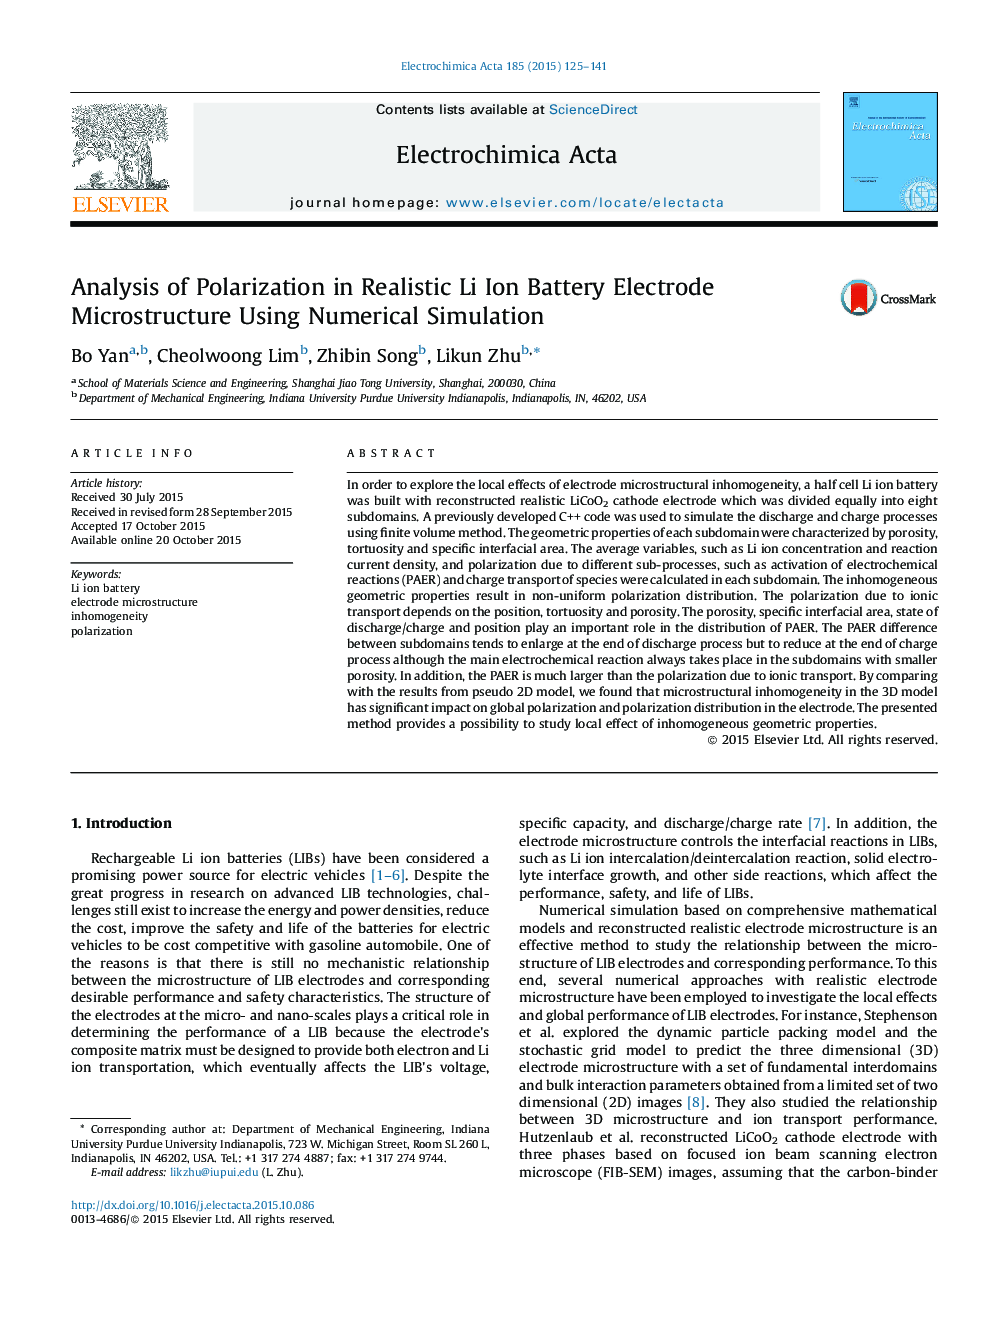 Analysis of Polarization in Realistic Li Ion Battery Electrode Microstructure Using Numerical Simulation